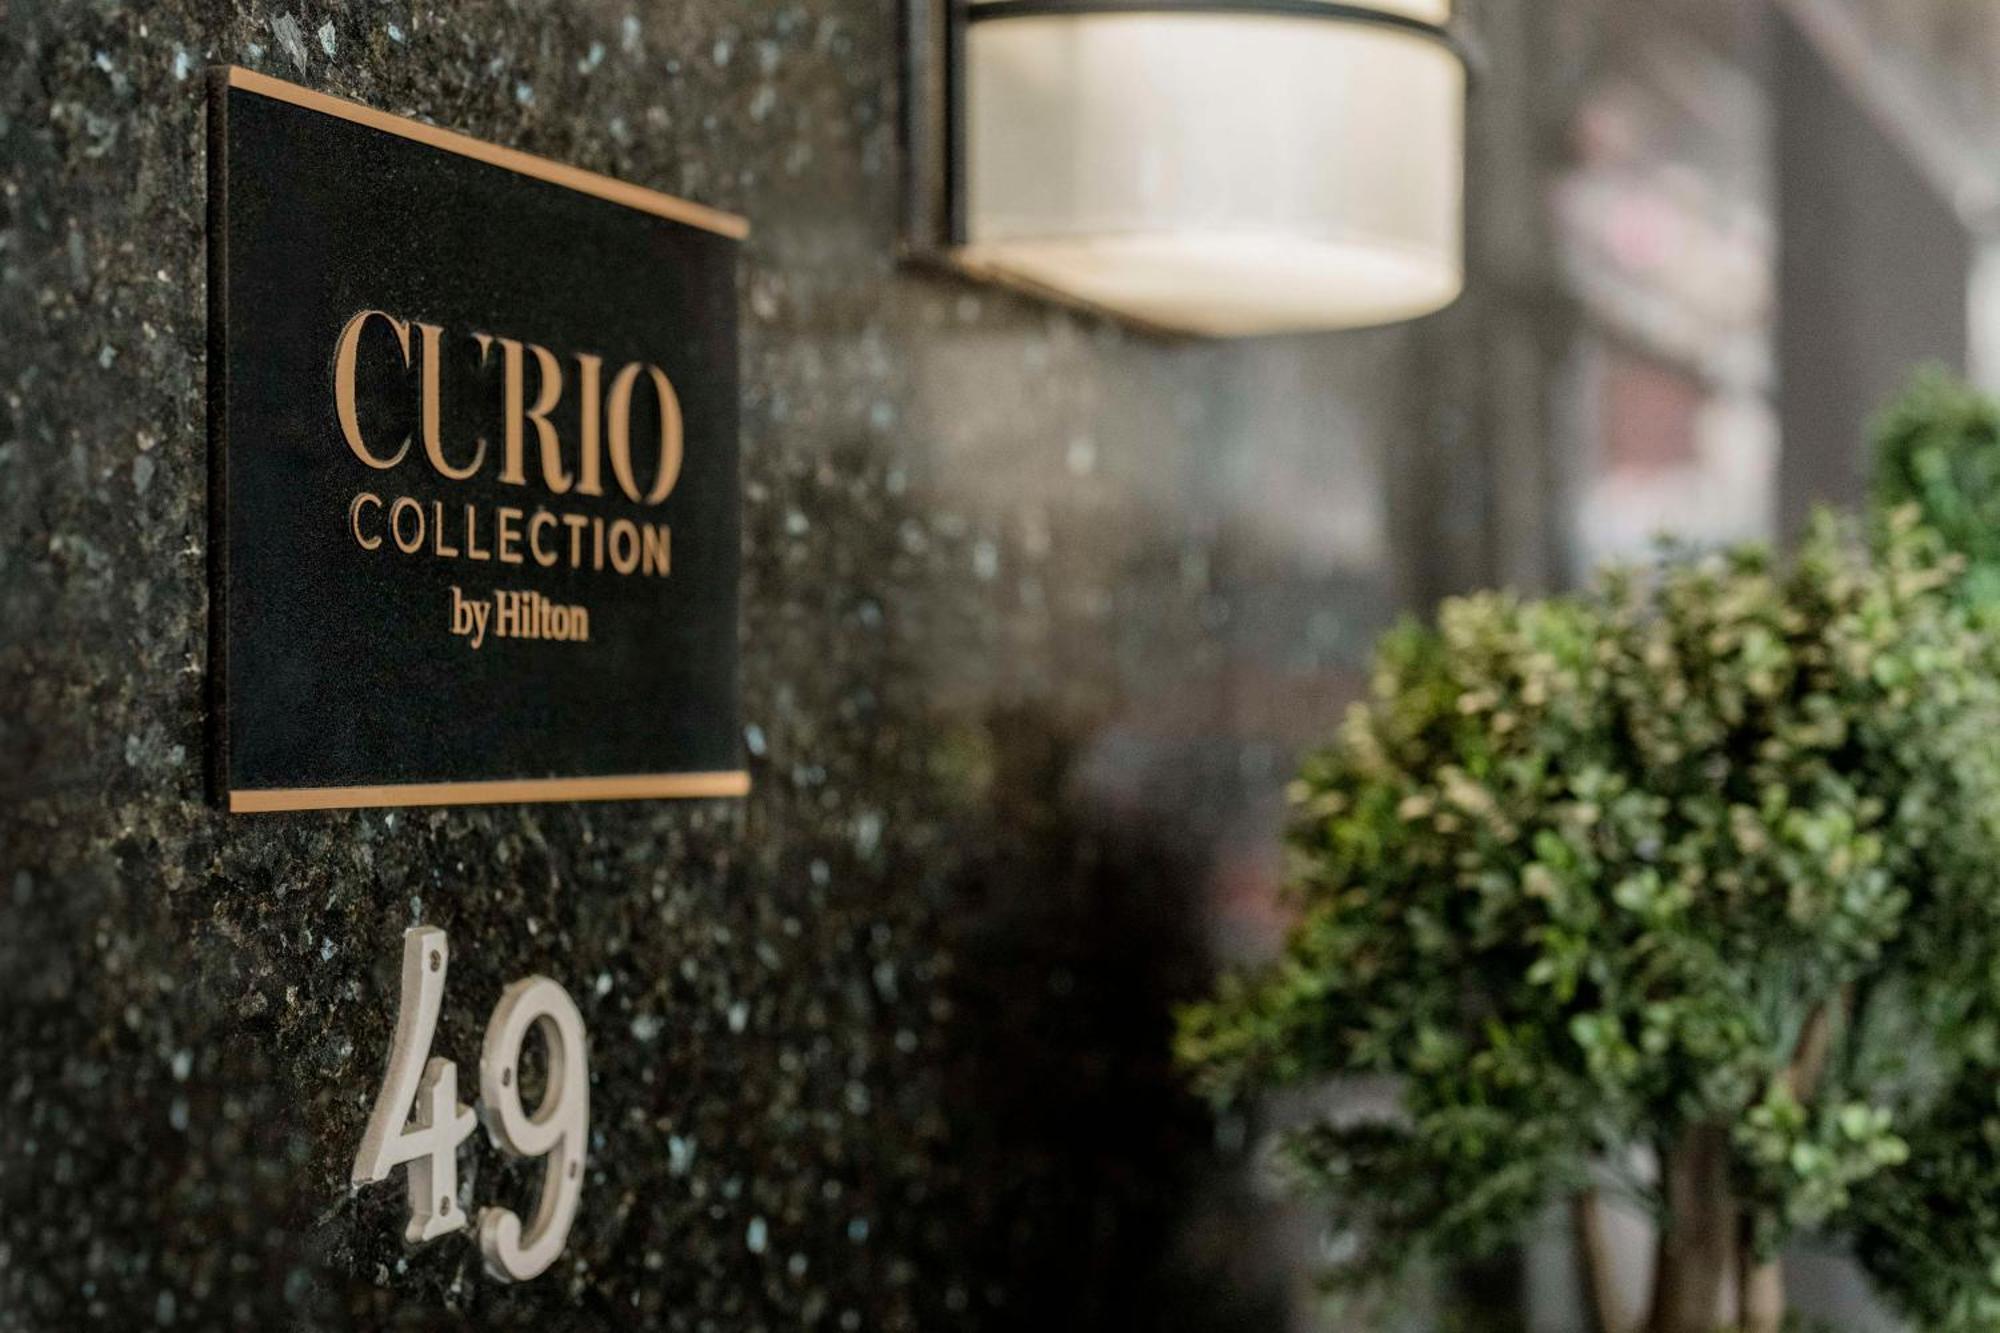 Martinique New York On Broadway, Curio Collection By Hilton Hotel Exterior foto